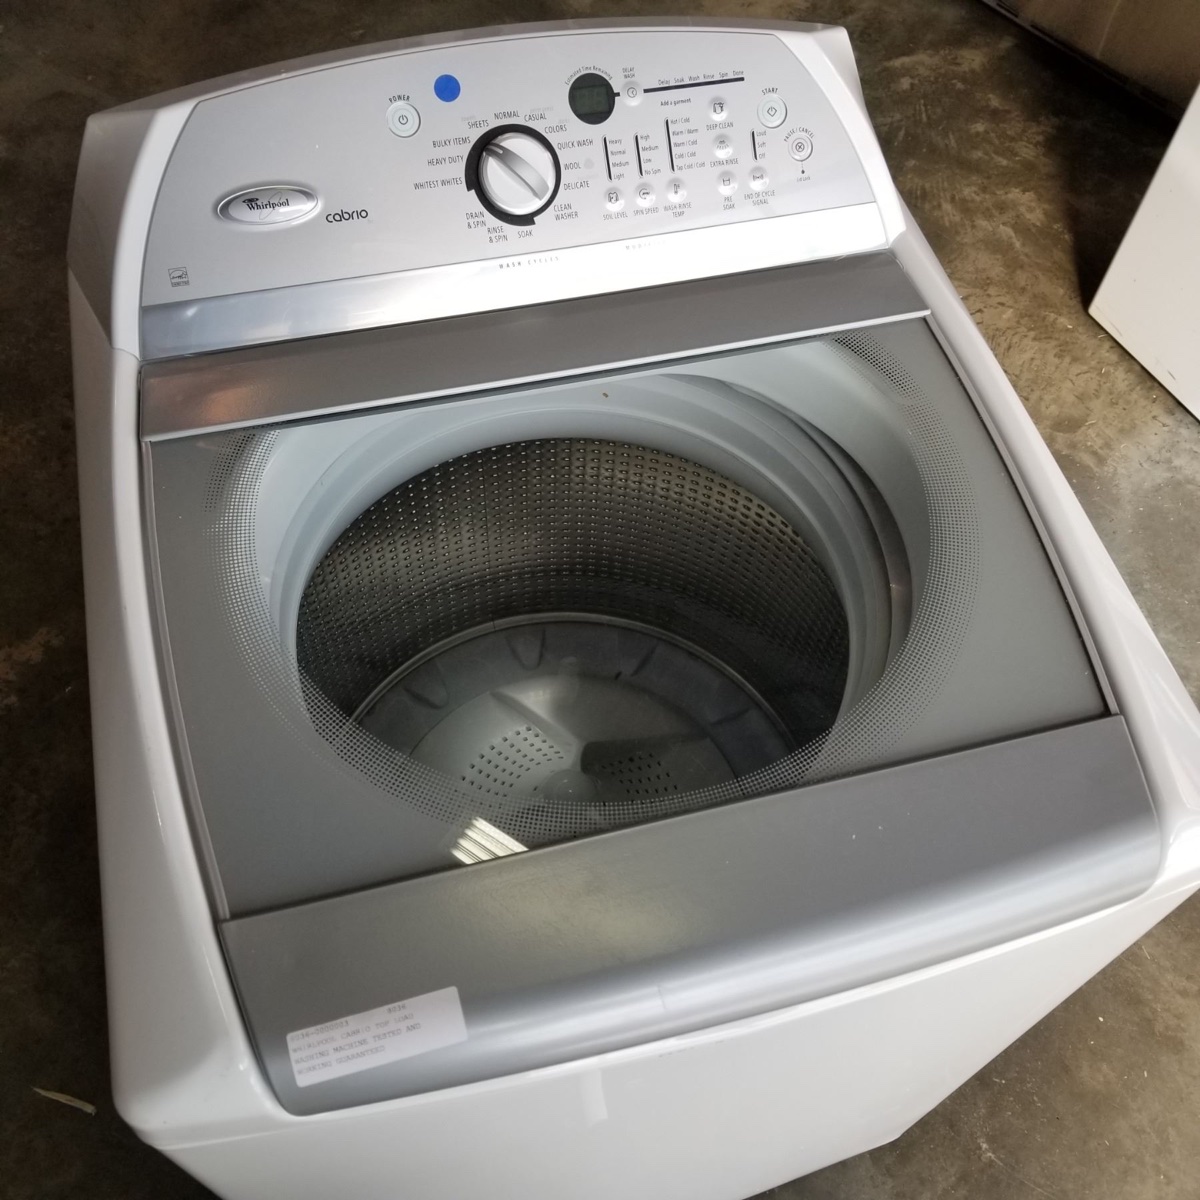 How To Start Whirlpool Washer